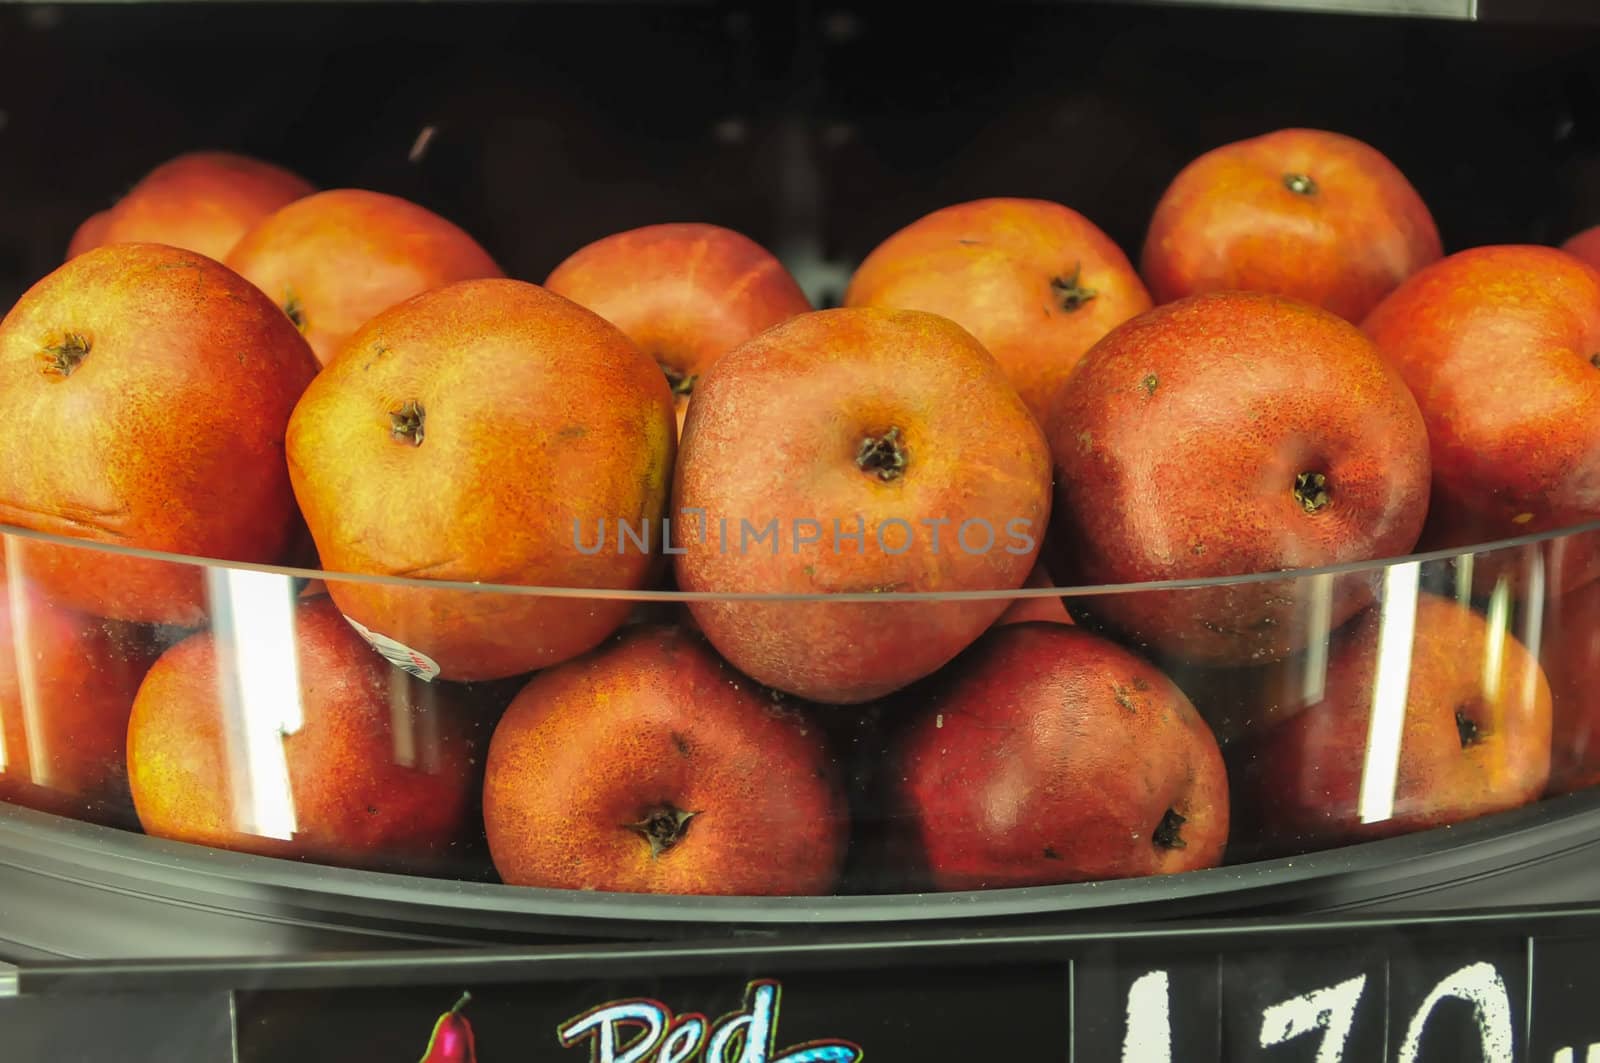 apples on shelf at the supermarket on display